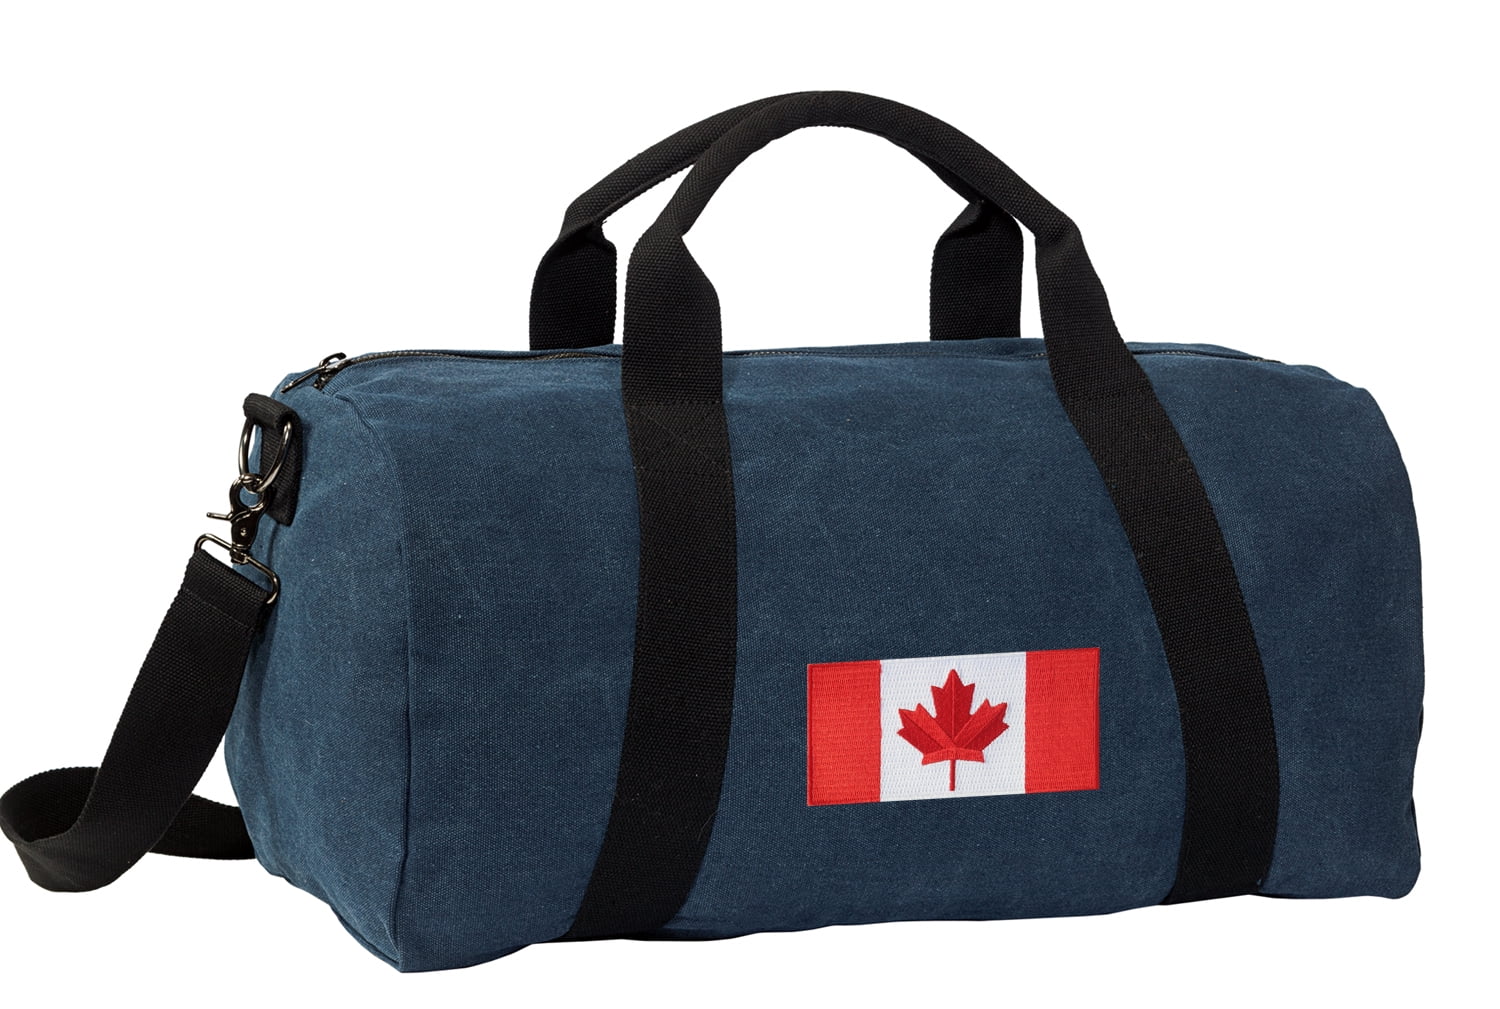 travel bags made in canada